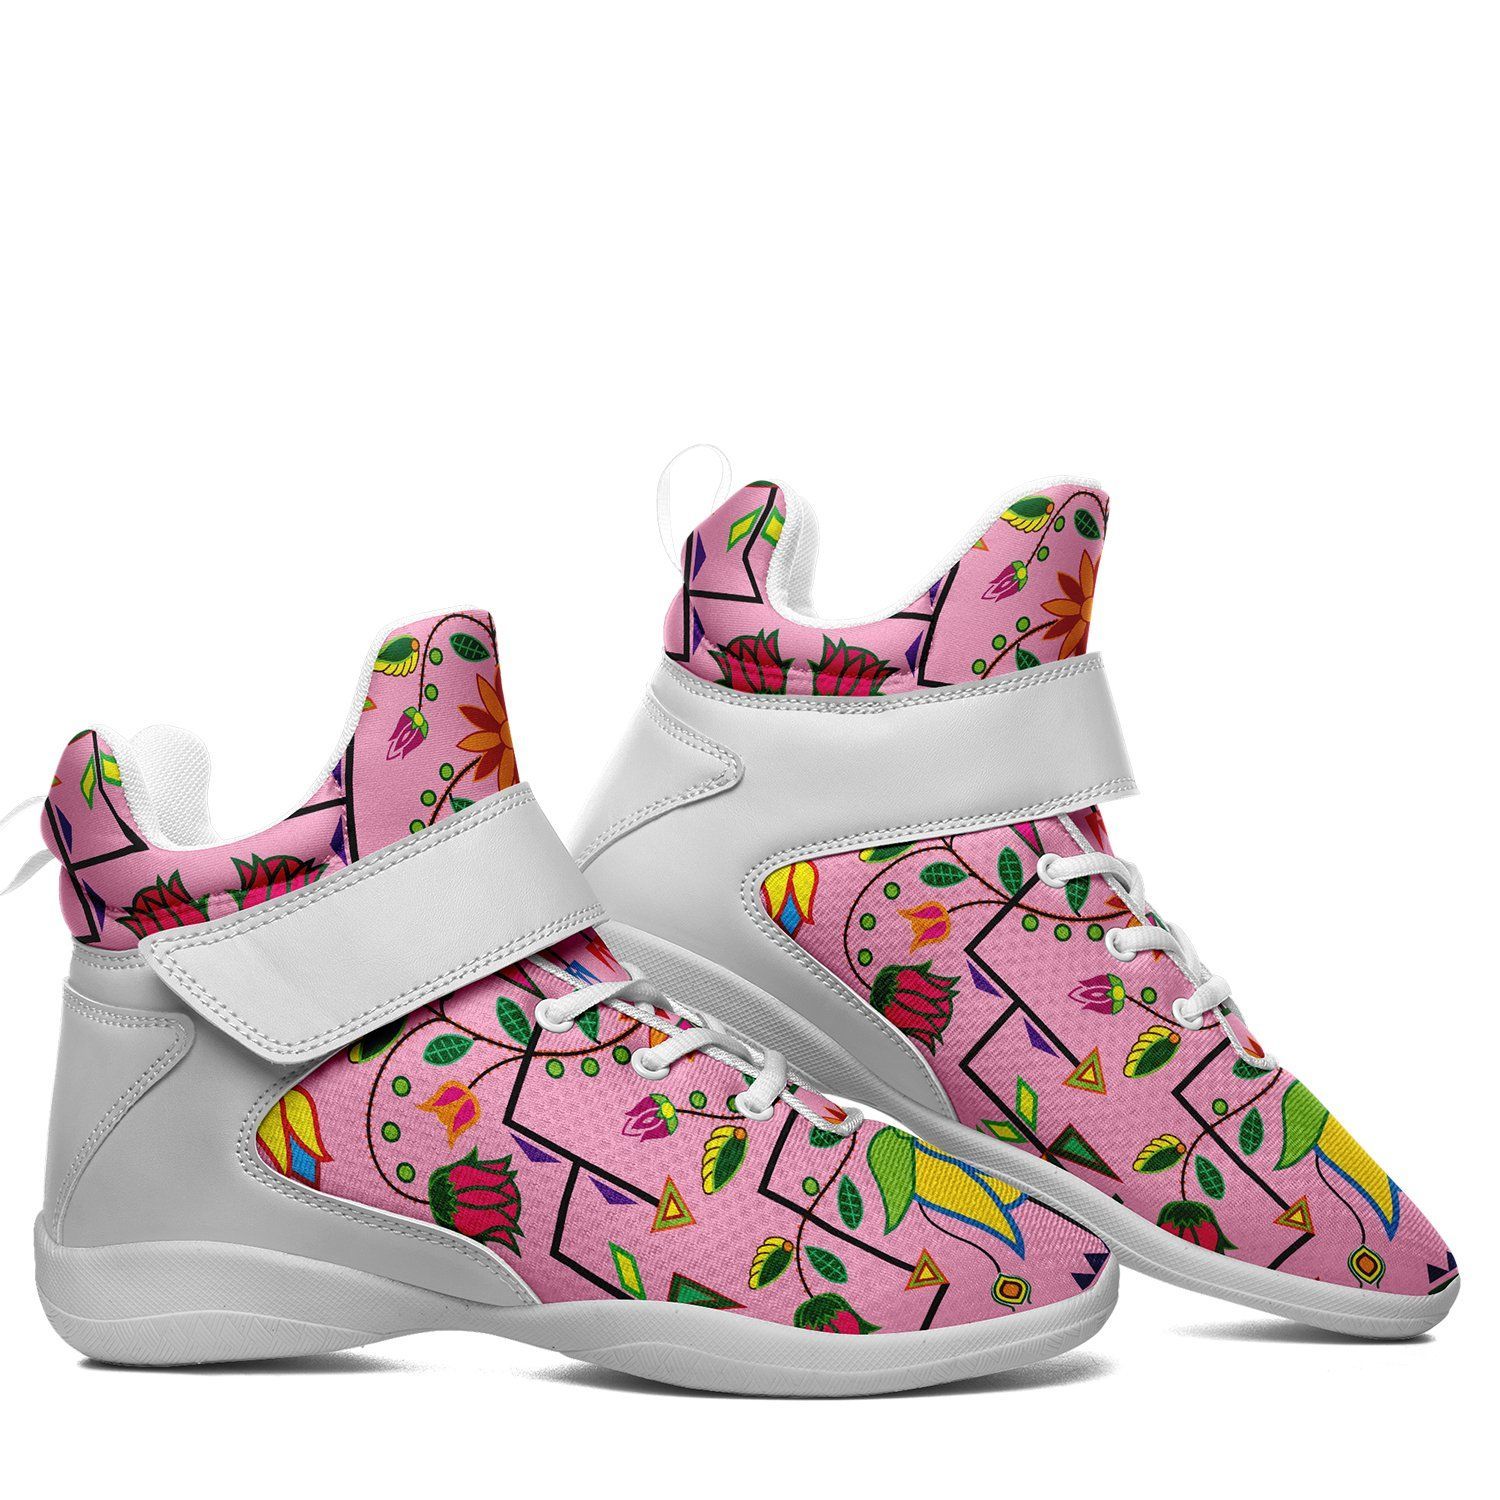 Geometric Floral Summer Sunset Ipottaa Basketball / Sport High Top Shoes - White Sole 49 Dzine 